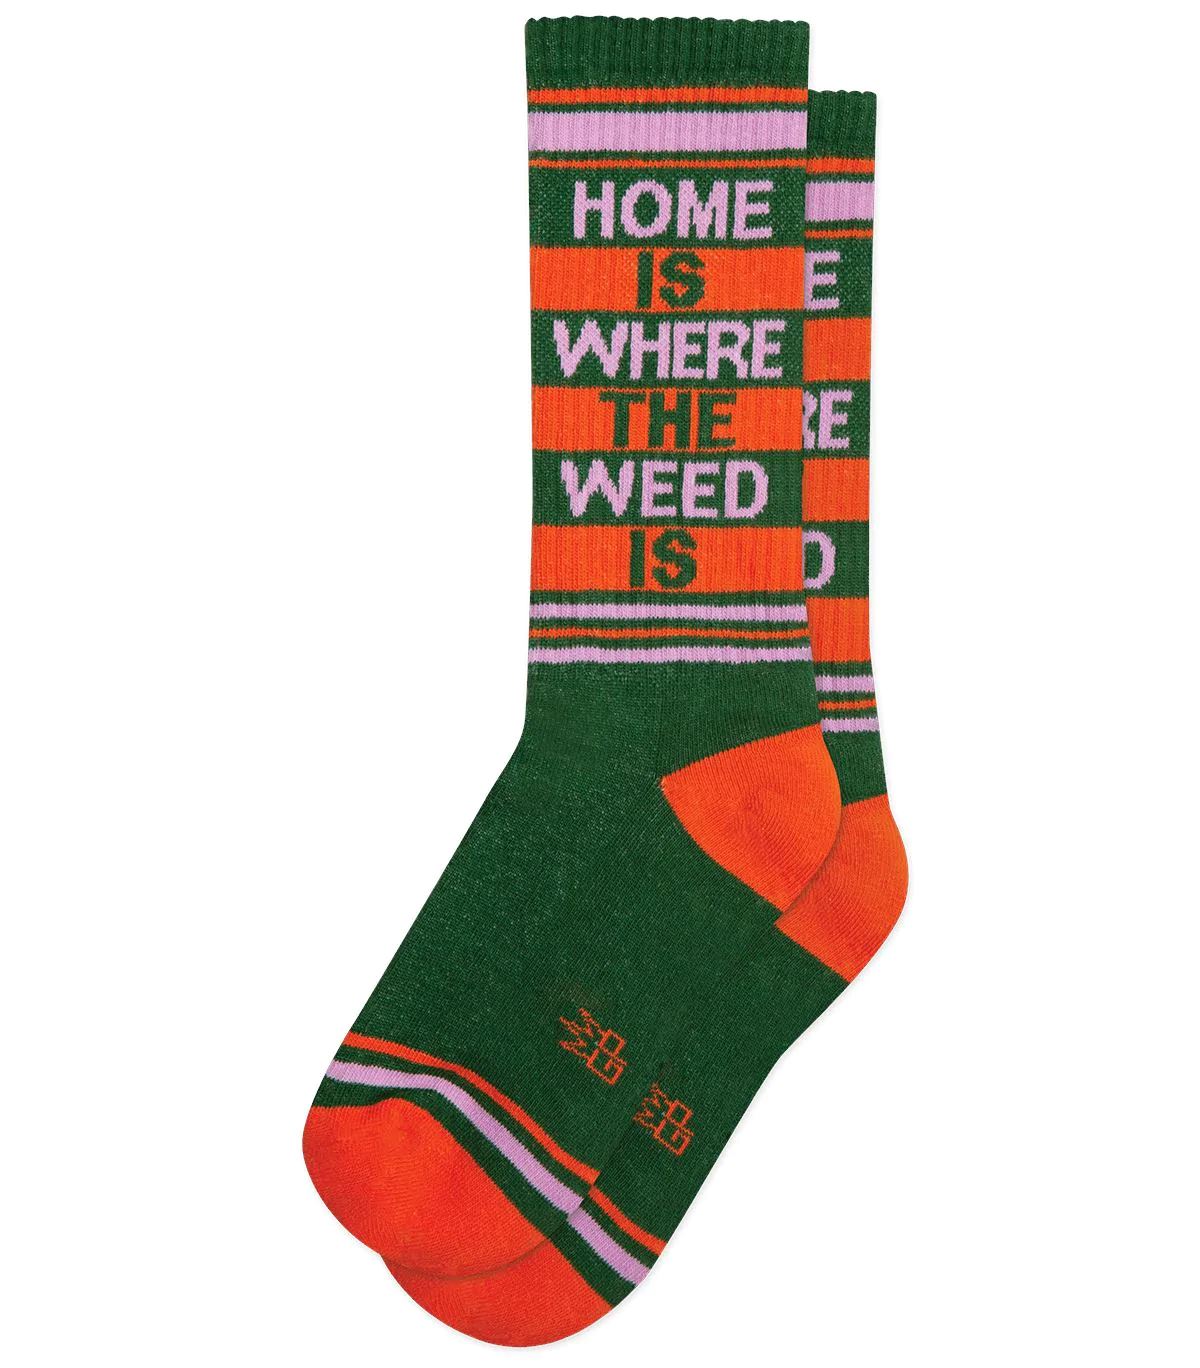 Home Is Where The Weed Is Socks x Gumball Poodle - Third Drawer Down